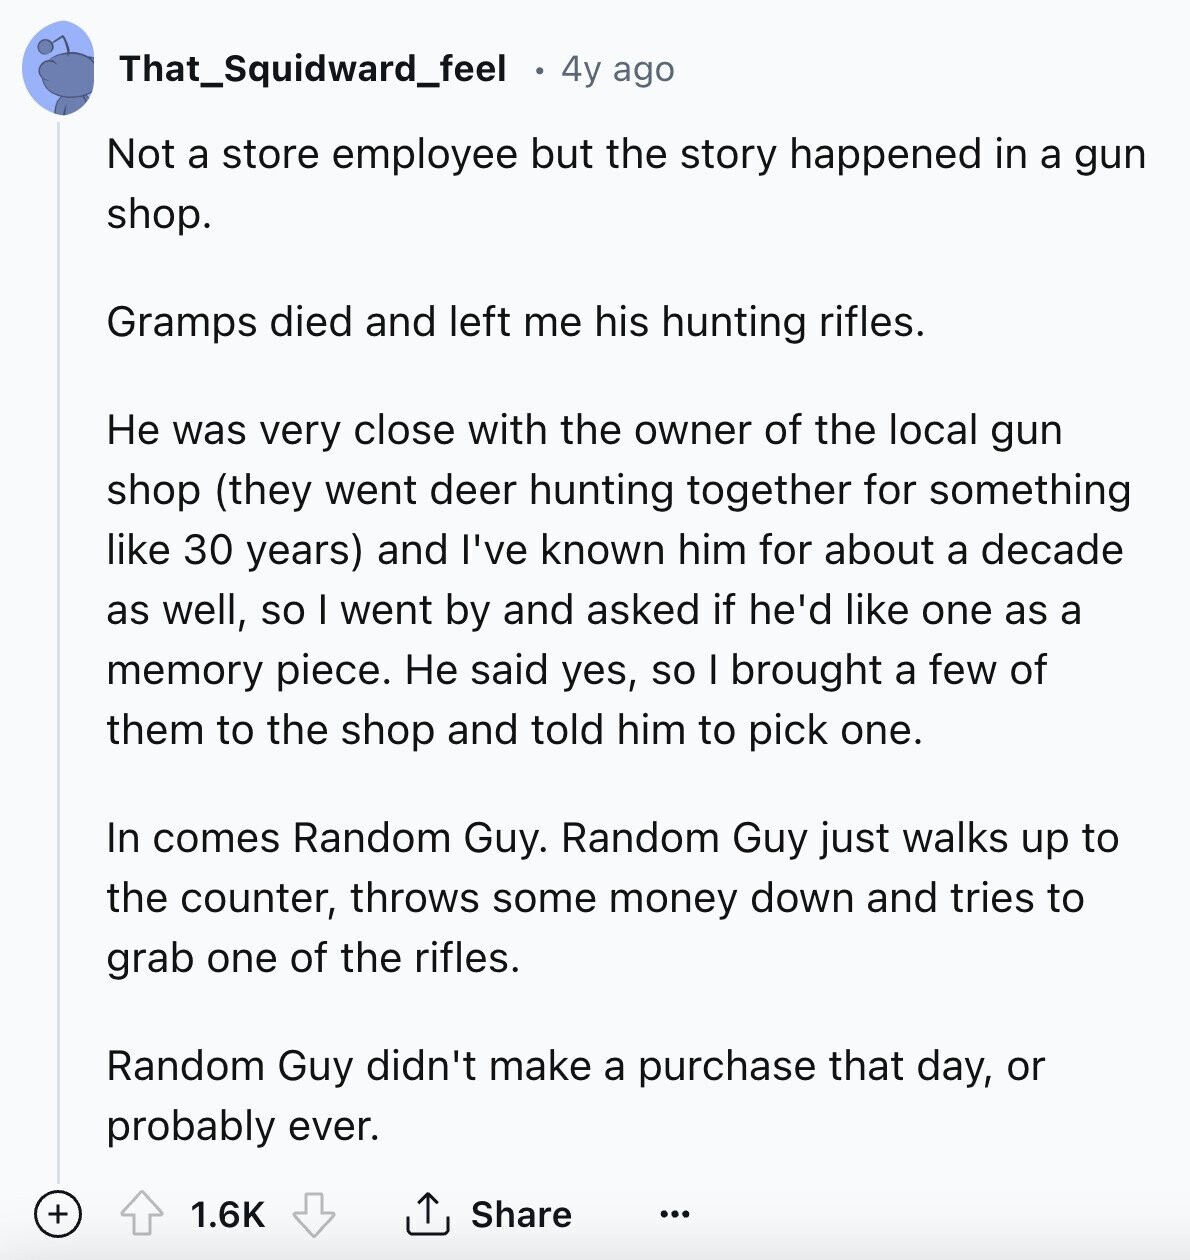 That_Squidward_feel 4y ago Not a store employee but the story happened in a gun shop. Gramps died and left me his hunting rifles. Не was very close with the owner of the local gun shop (they went deer hunting together for something like 30 years) and I've known him for about a decade as well, so I went by and asked if he'd like one as a memory piece. Не said yes, so I brought a few of them to the shop and told him to pick one. In comes Random Guy. Random Guy just walks up to the counter, 